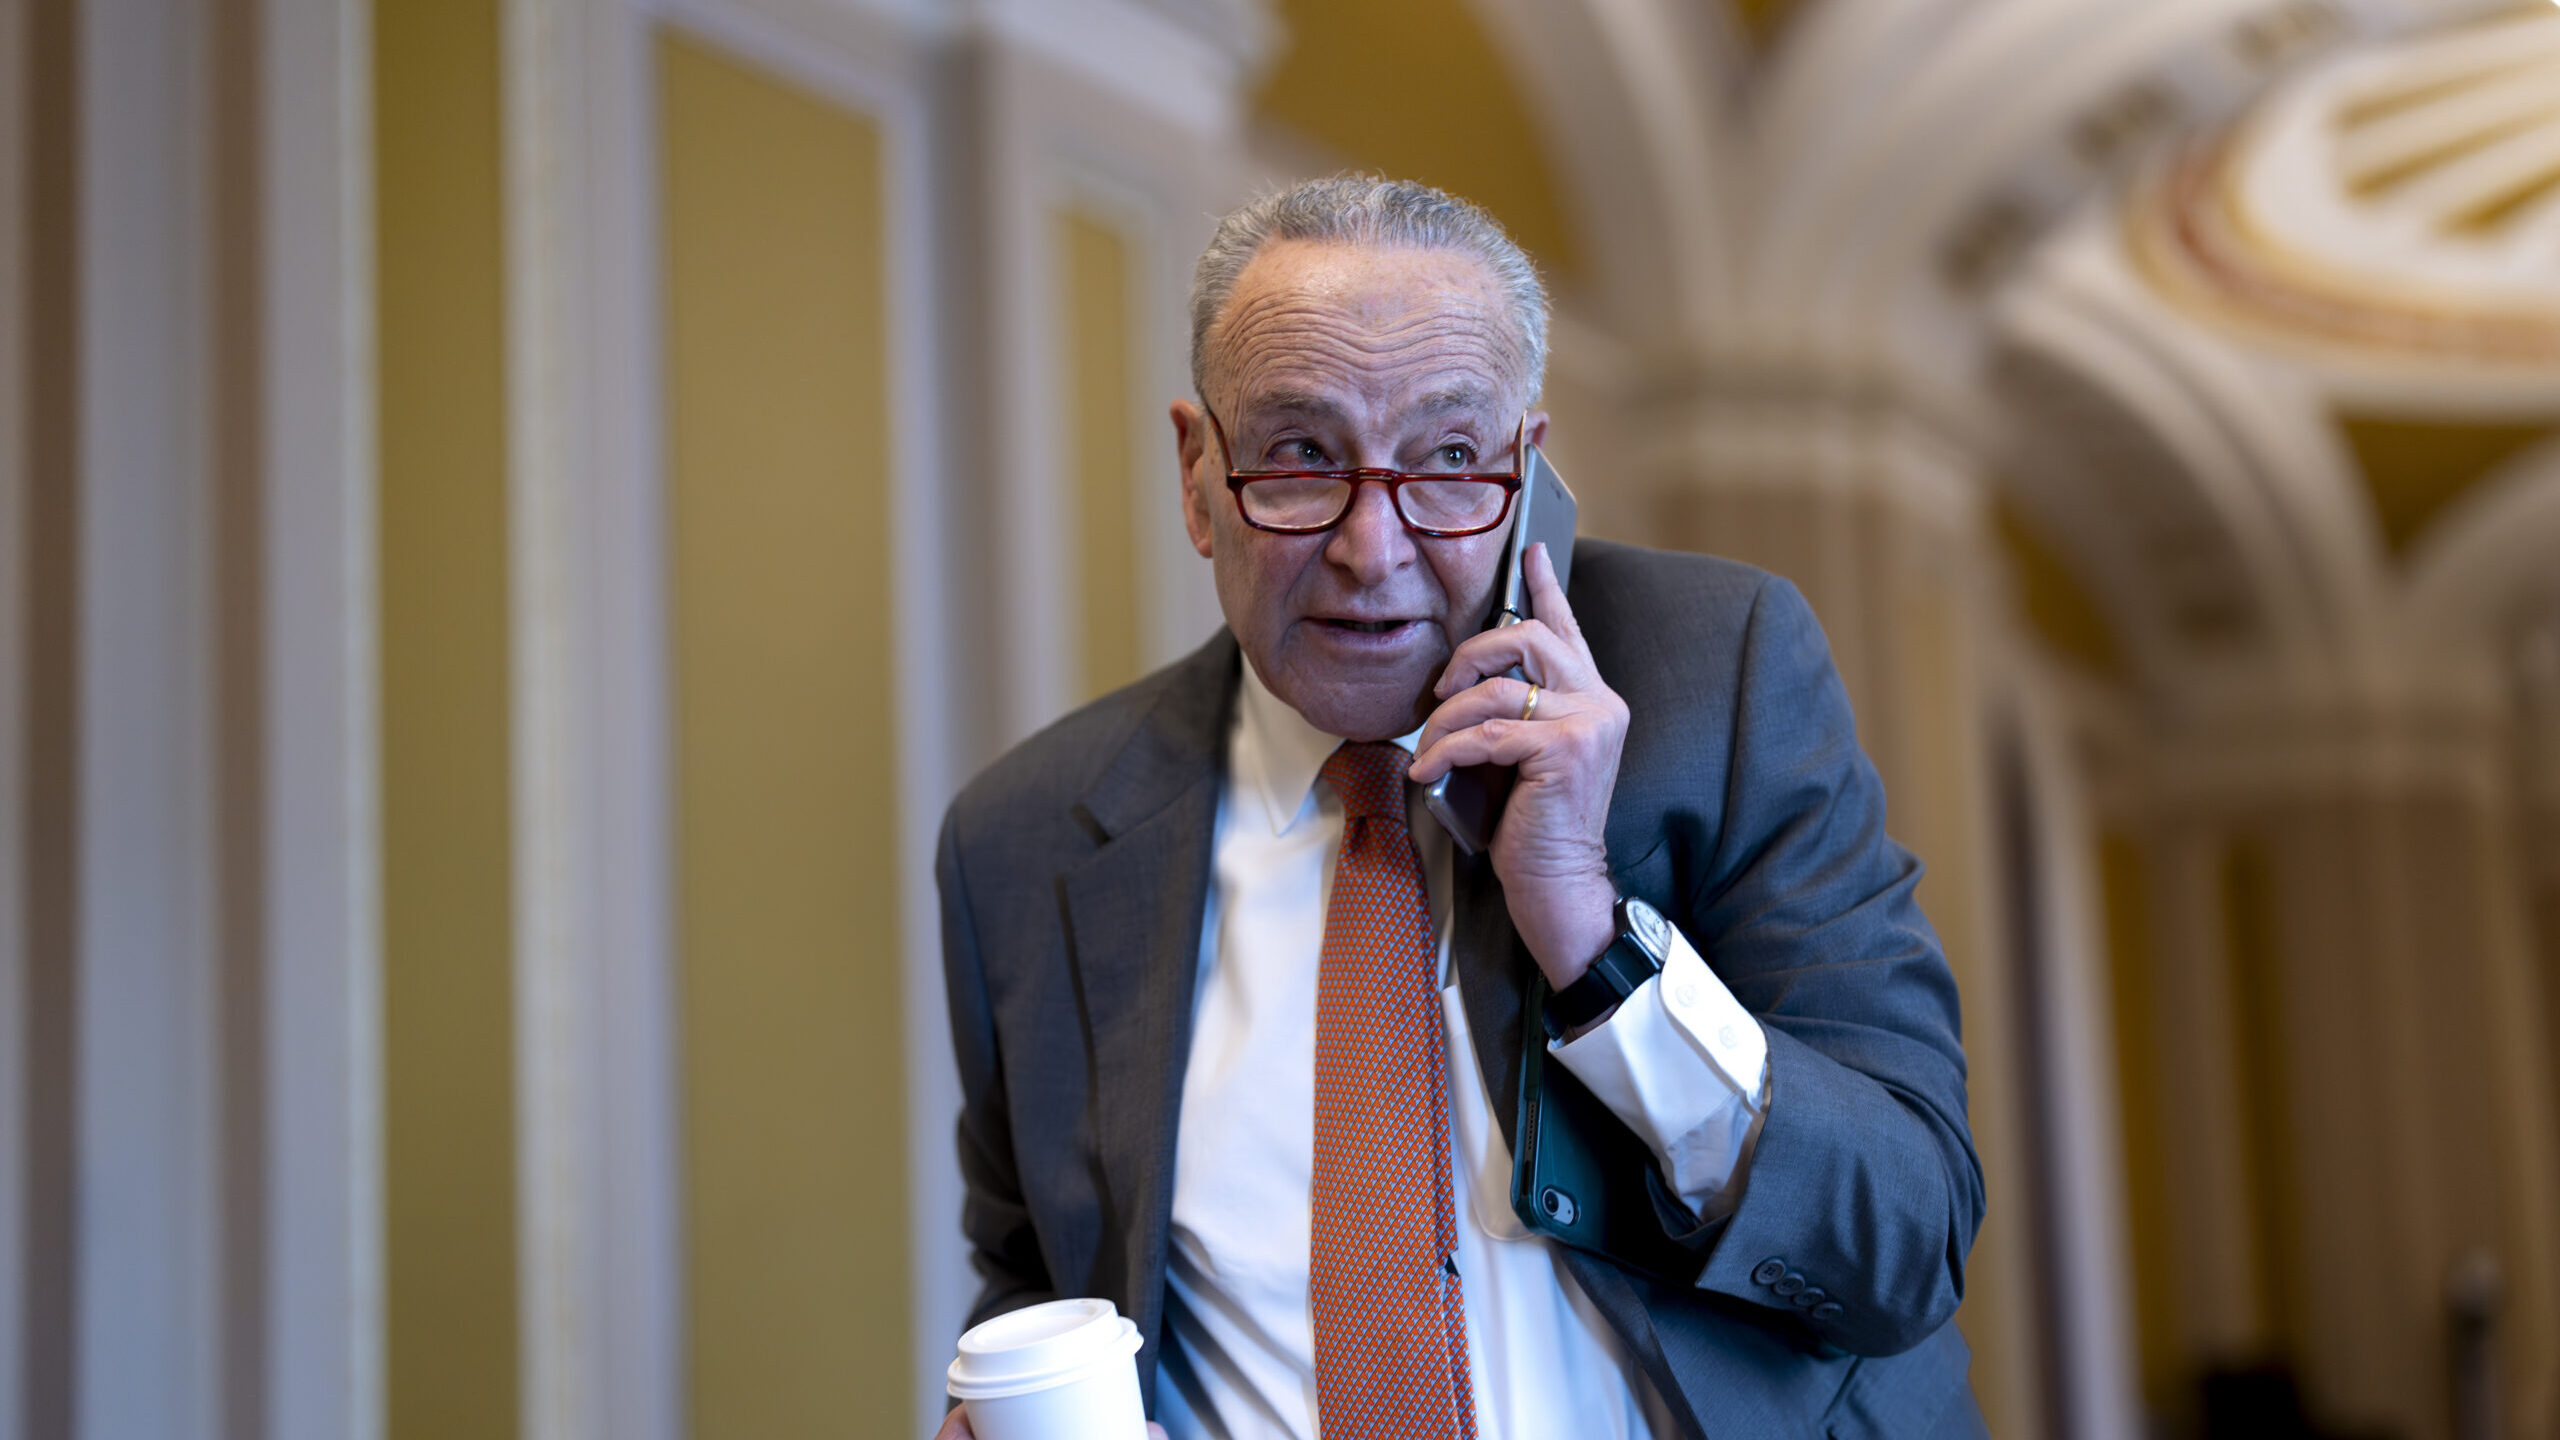 Senate Majority Leader Chuck Schumer, D-N.Y., arrives at the Capitol while Republicans hold a close...